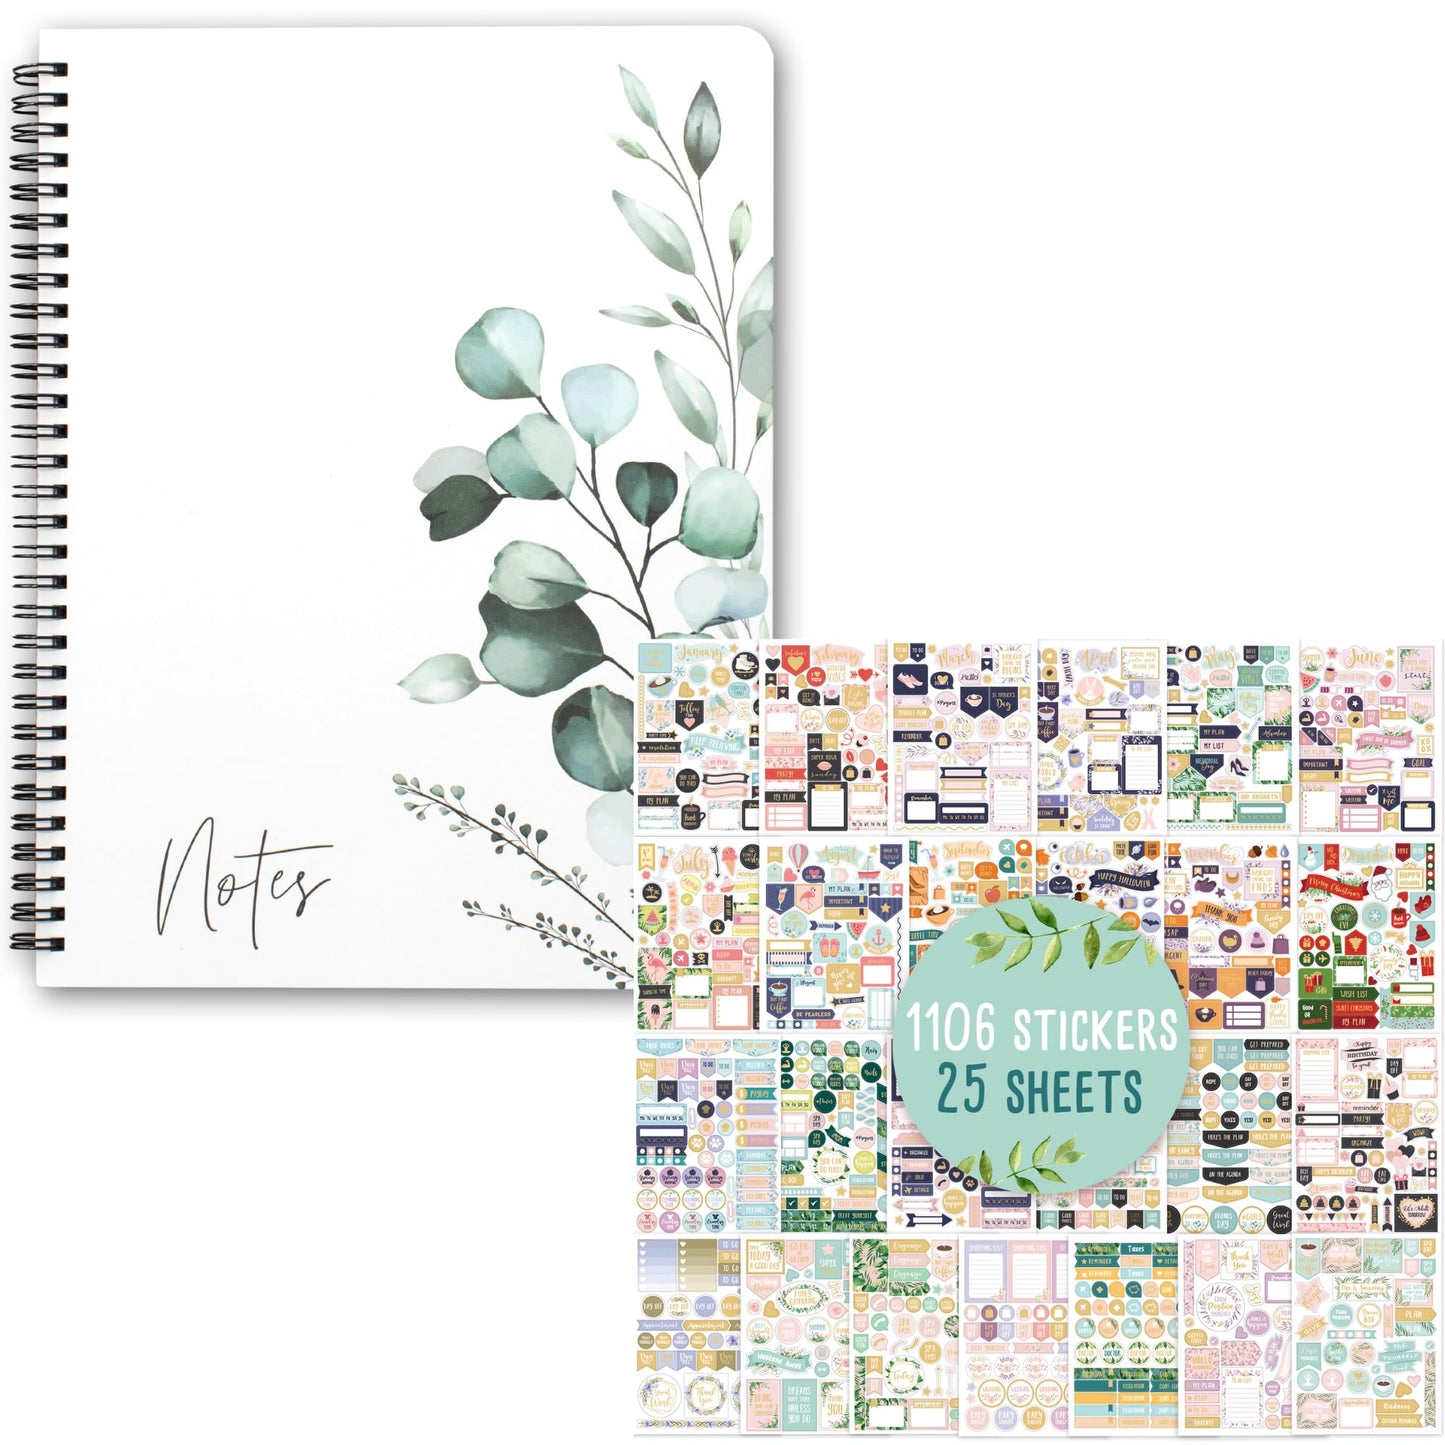 Aesthetic Planner Stickers and Spiral Notebook Journal Bundle - 1100+ Stunning Scrapbook Stickers and College Ruled Notebook to Stay Organized at Work or School